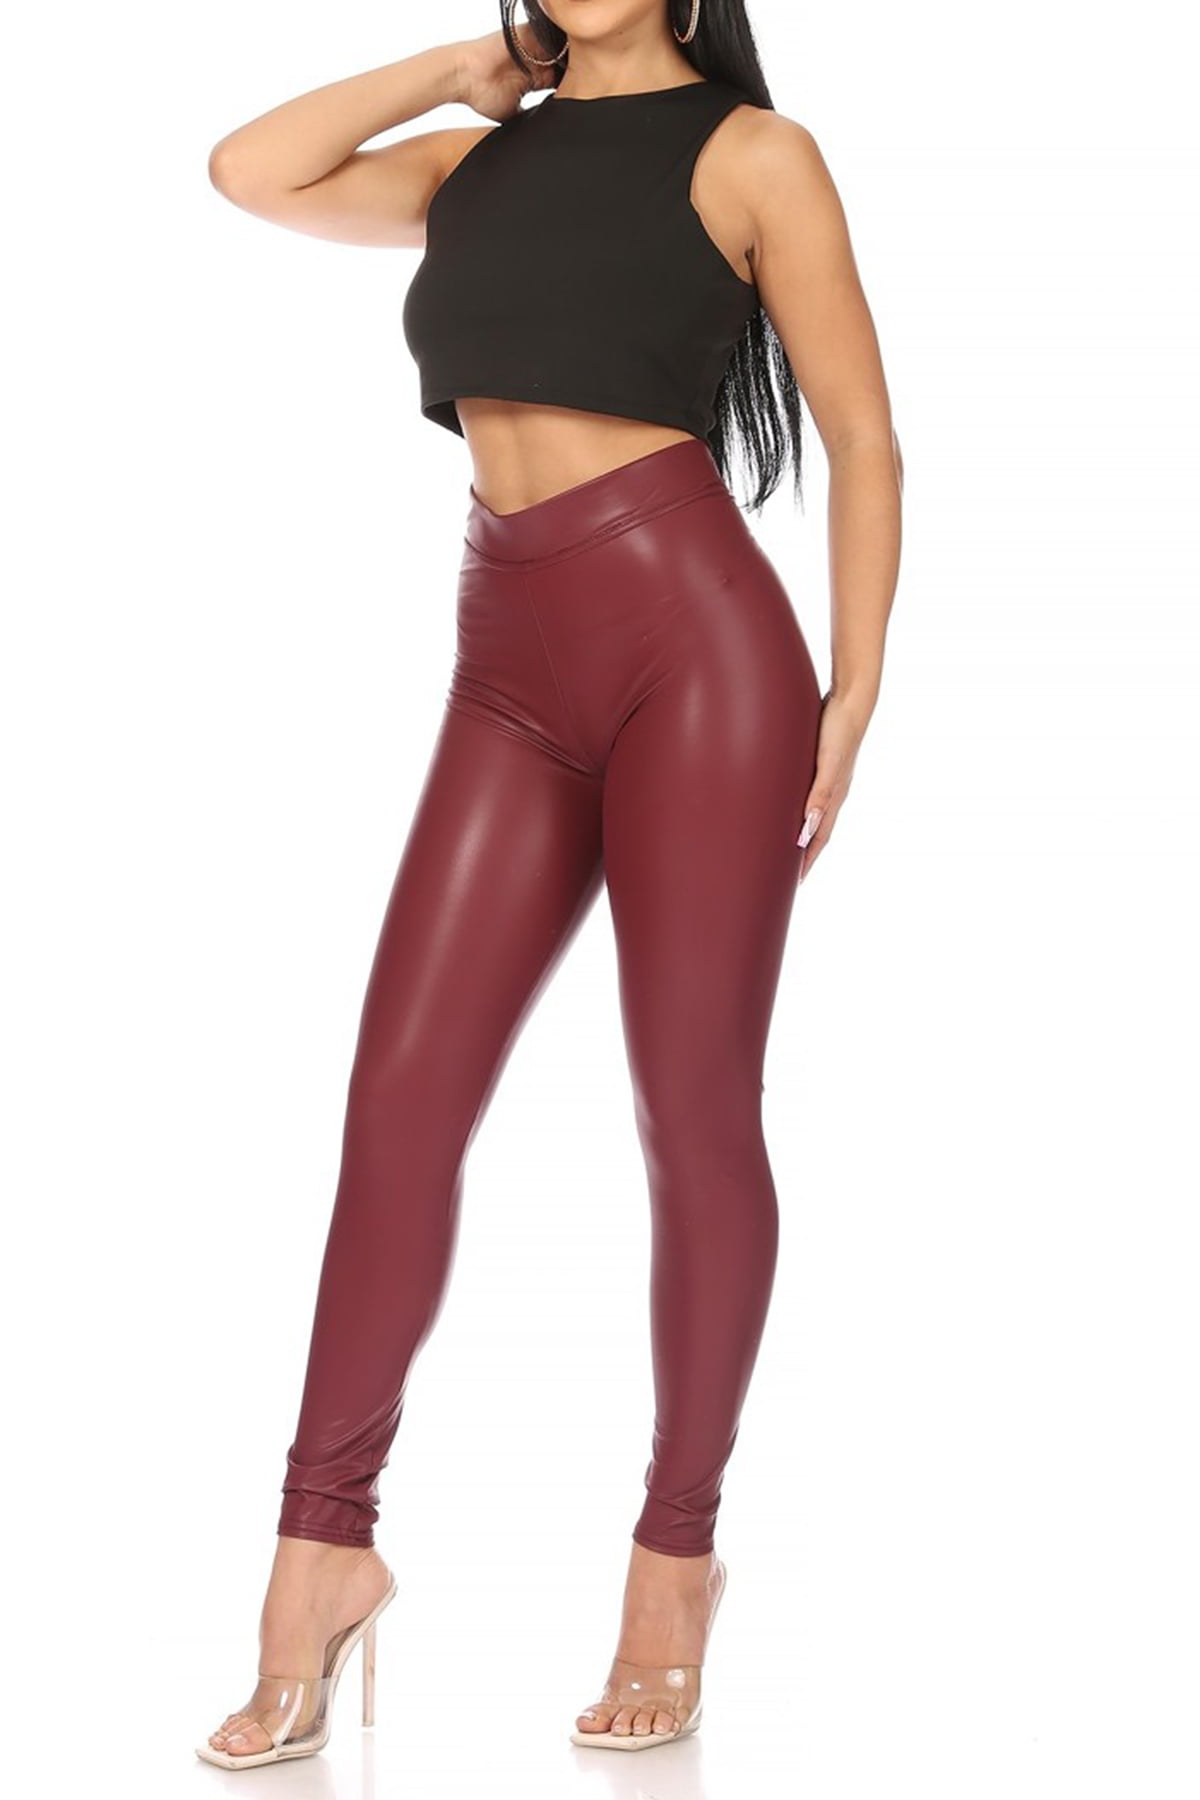 The Pioneer Woman Faux Leather Leggings, Womens 